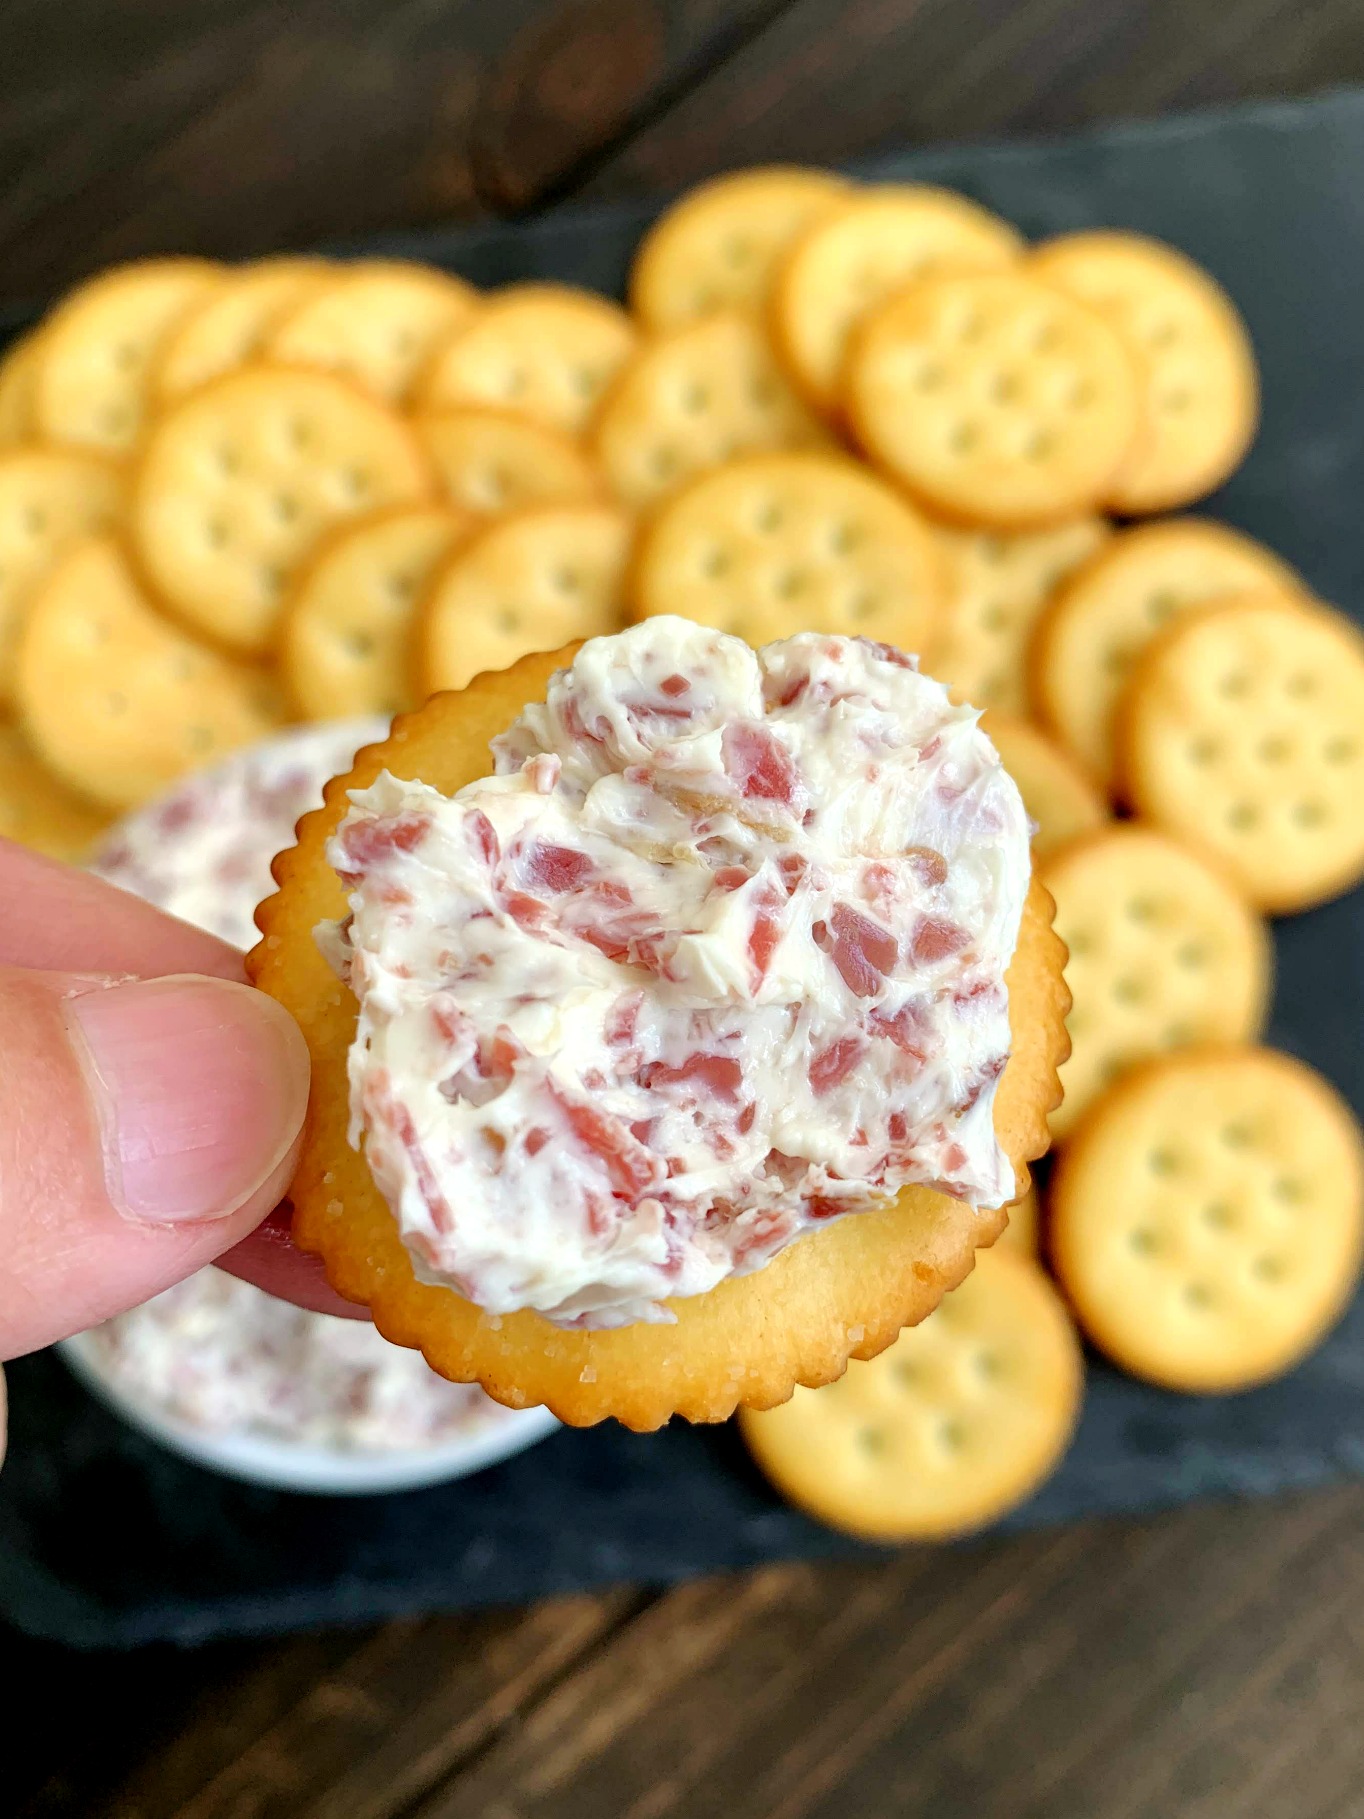 cracker smeared with chipped beef dip with a pile of crackers in the background